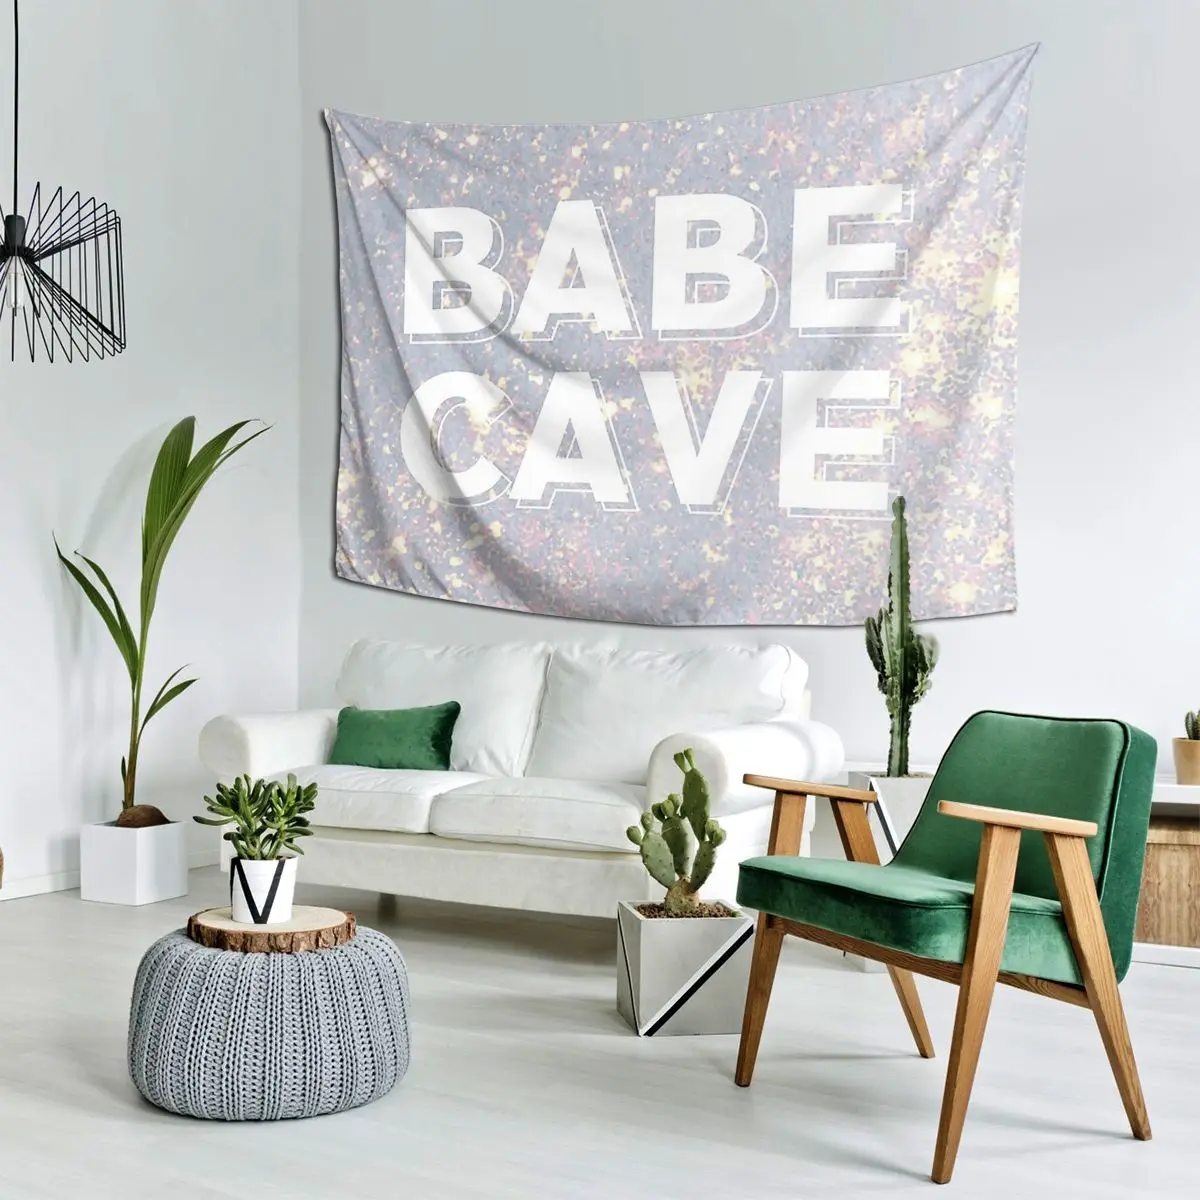 

Babe Cave Tapestry Decoration Art Aesthetic Tapestries for Living Room Bedroom Decor Home Hippie Wall Cloth Wall Hanging